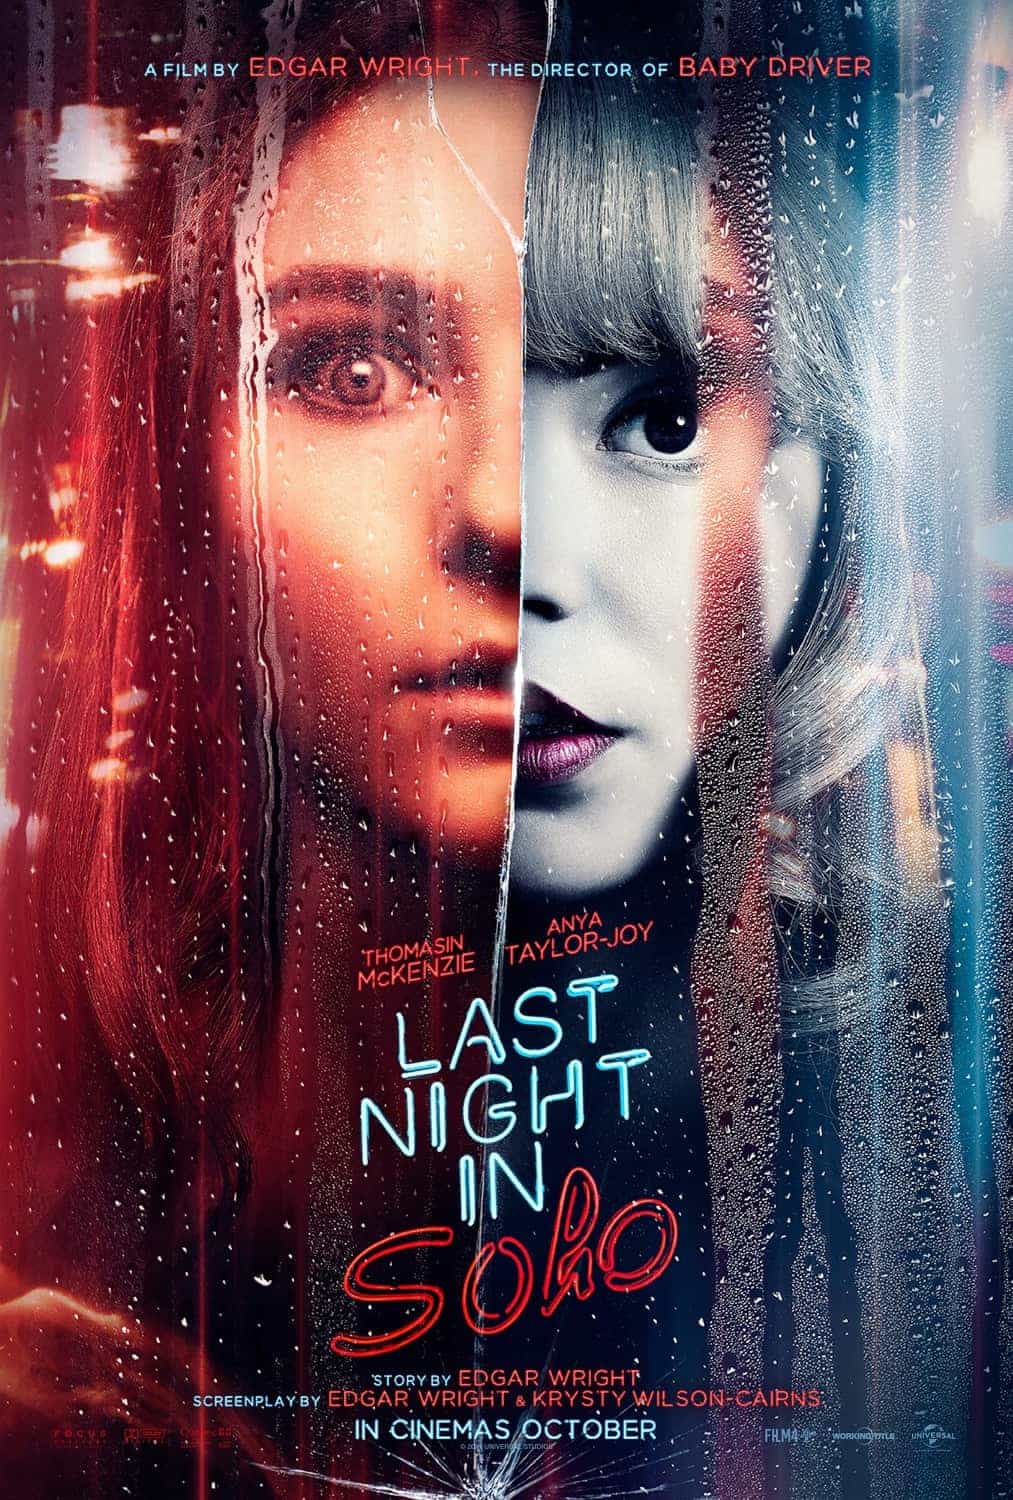 First trailer and poster for Last Night In Soho from director Edgar Wright - movie release date 29th October 2021